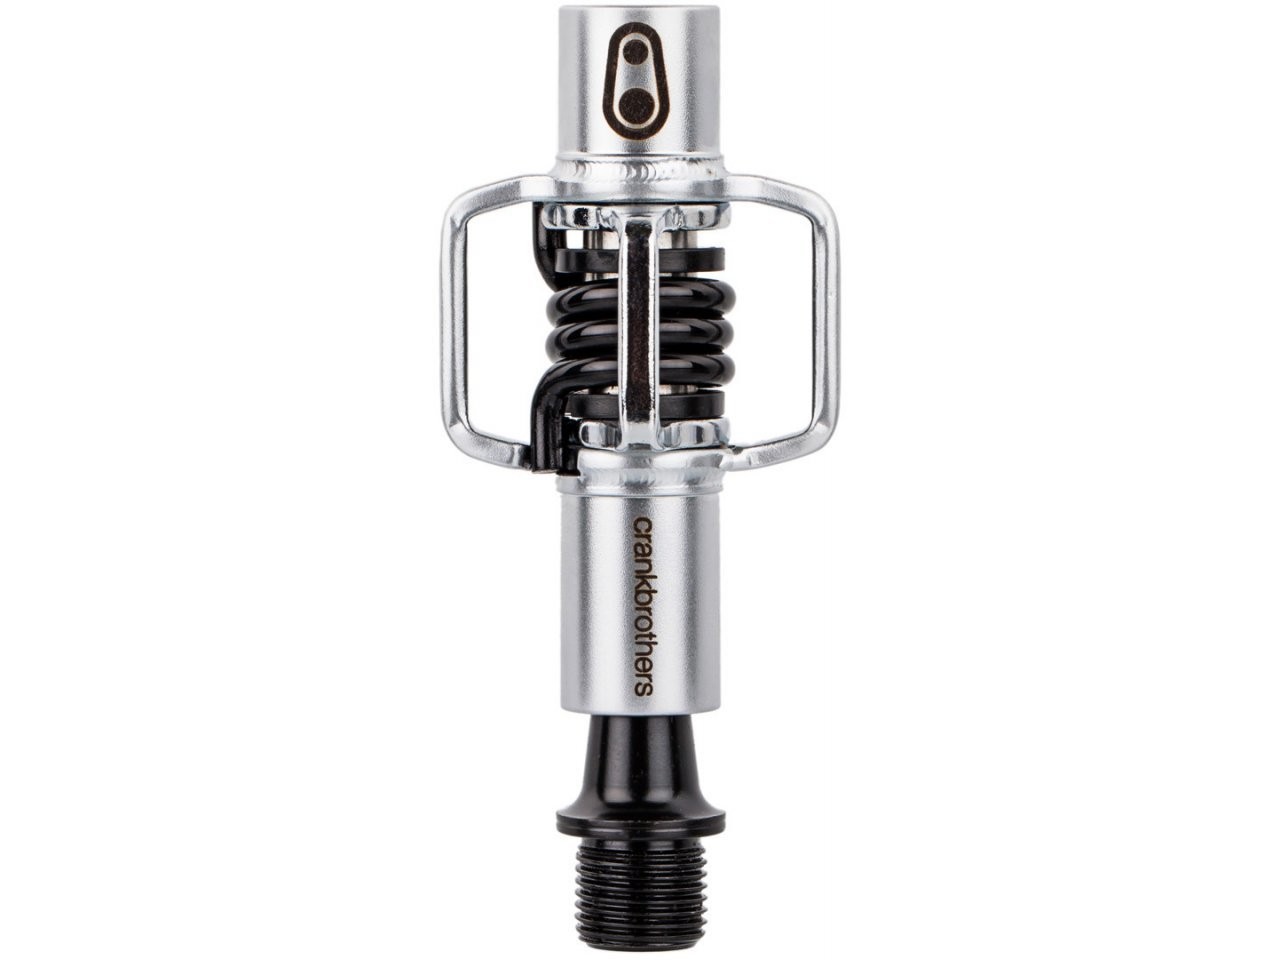 PEDAL CRANKBROTHERS EGGBEATER 1 - PRETO